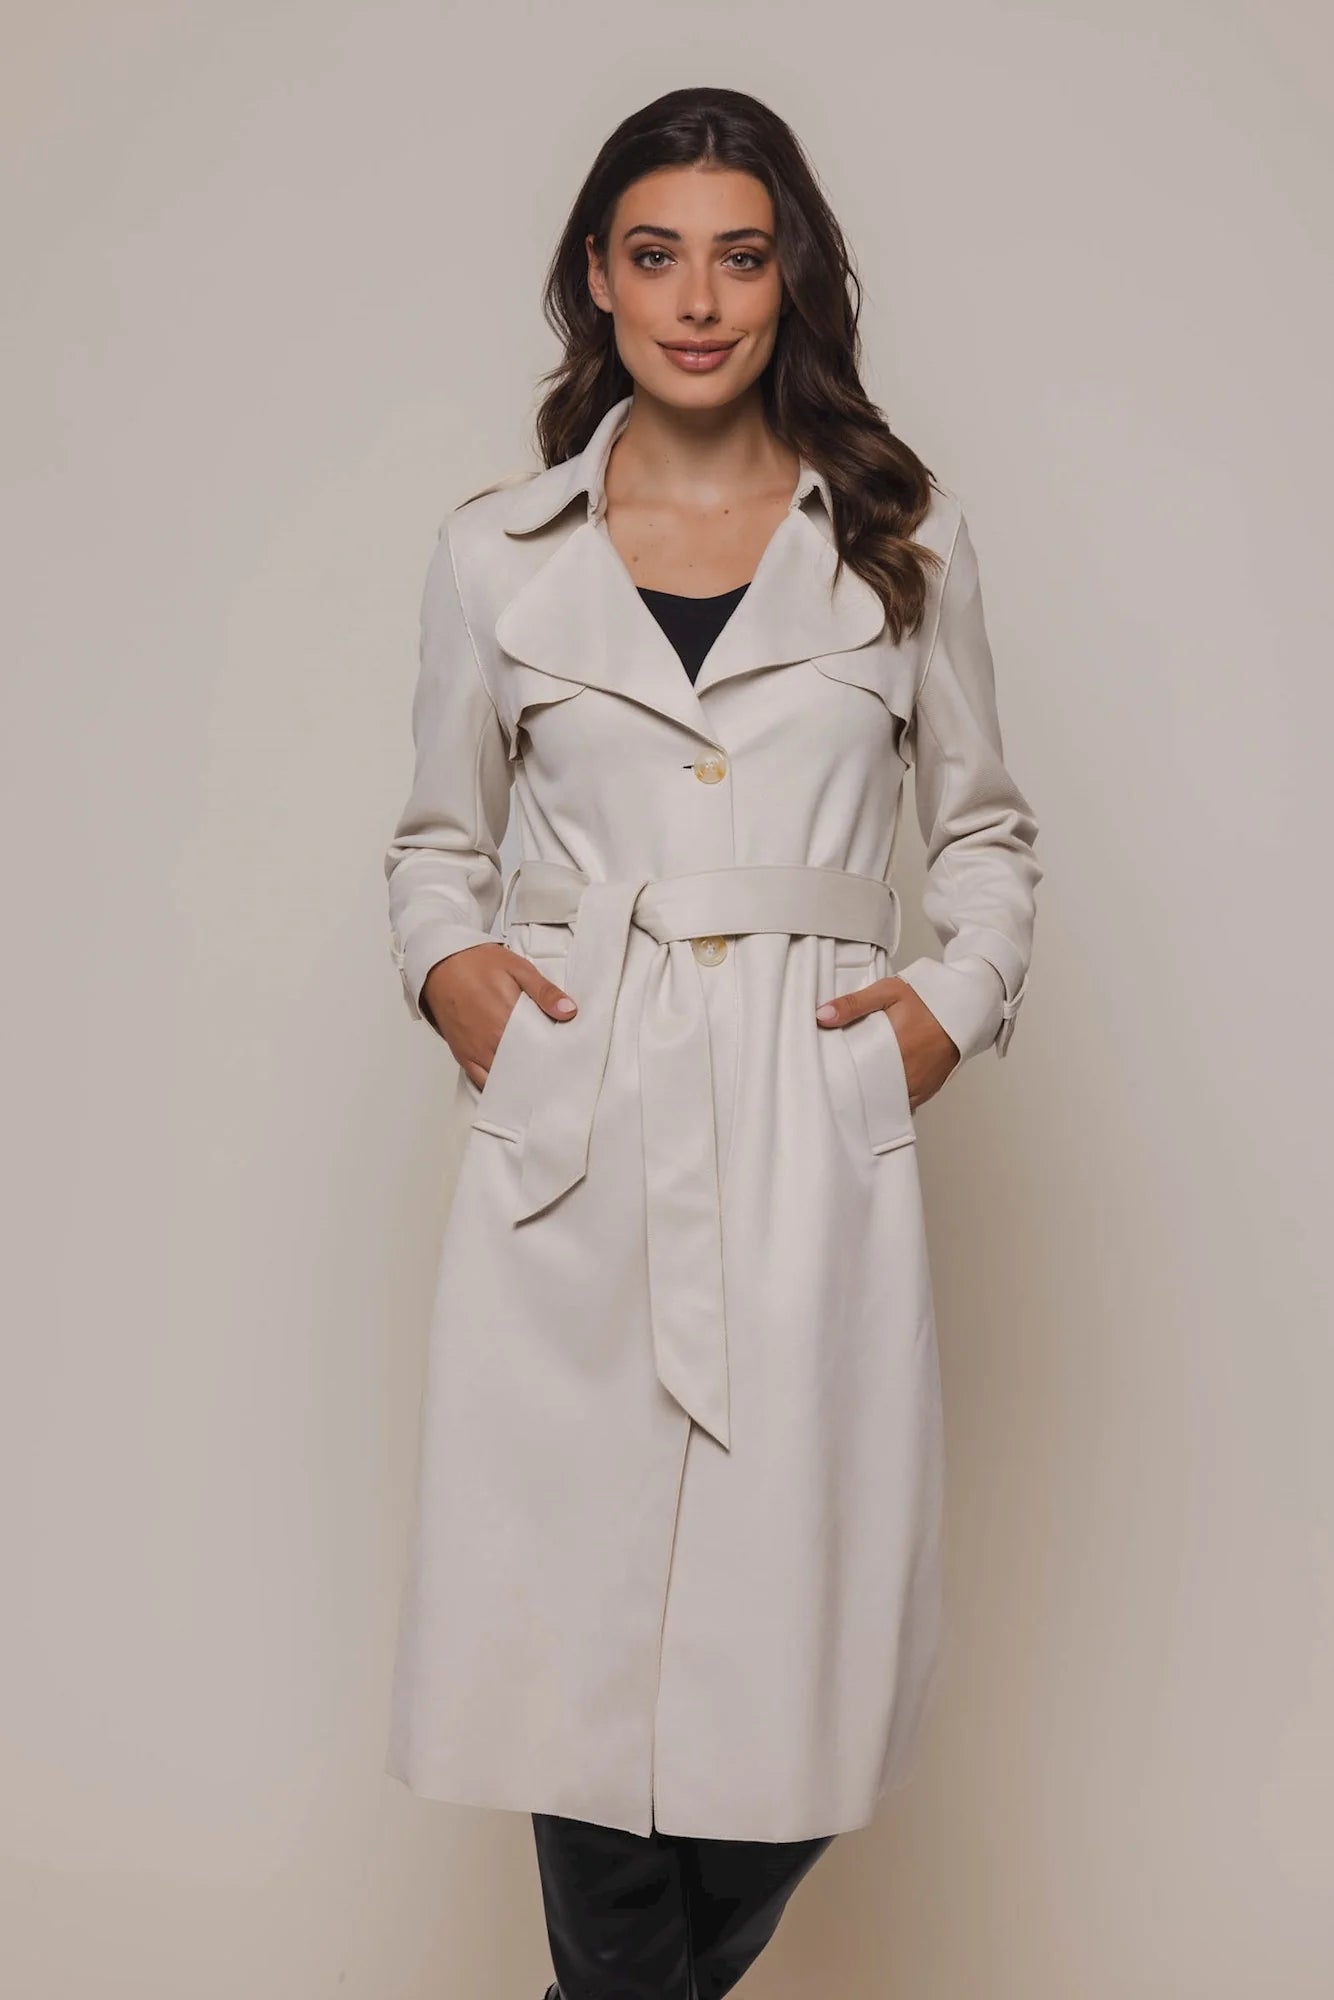 Nula Trench Coat by Rino & Pelle - Blue Sky Fashions & Lingerie